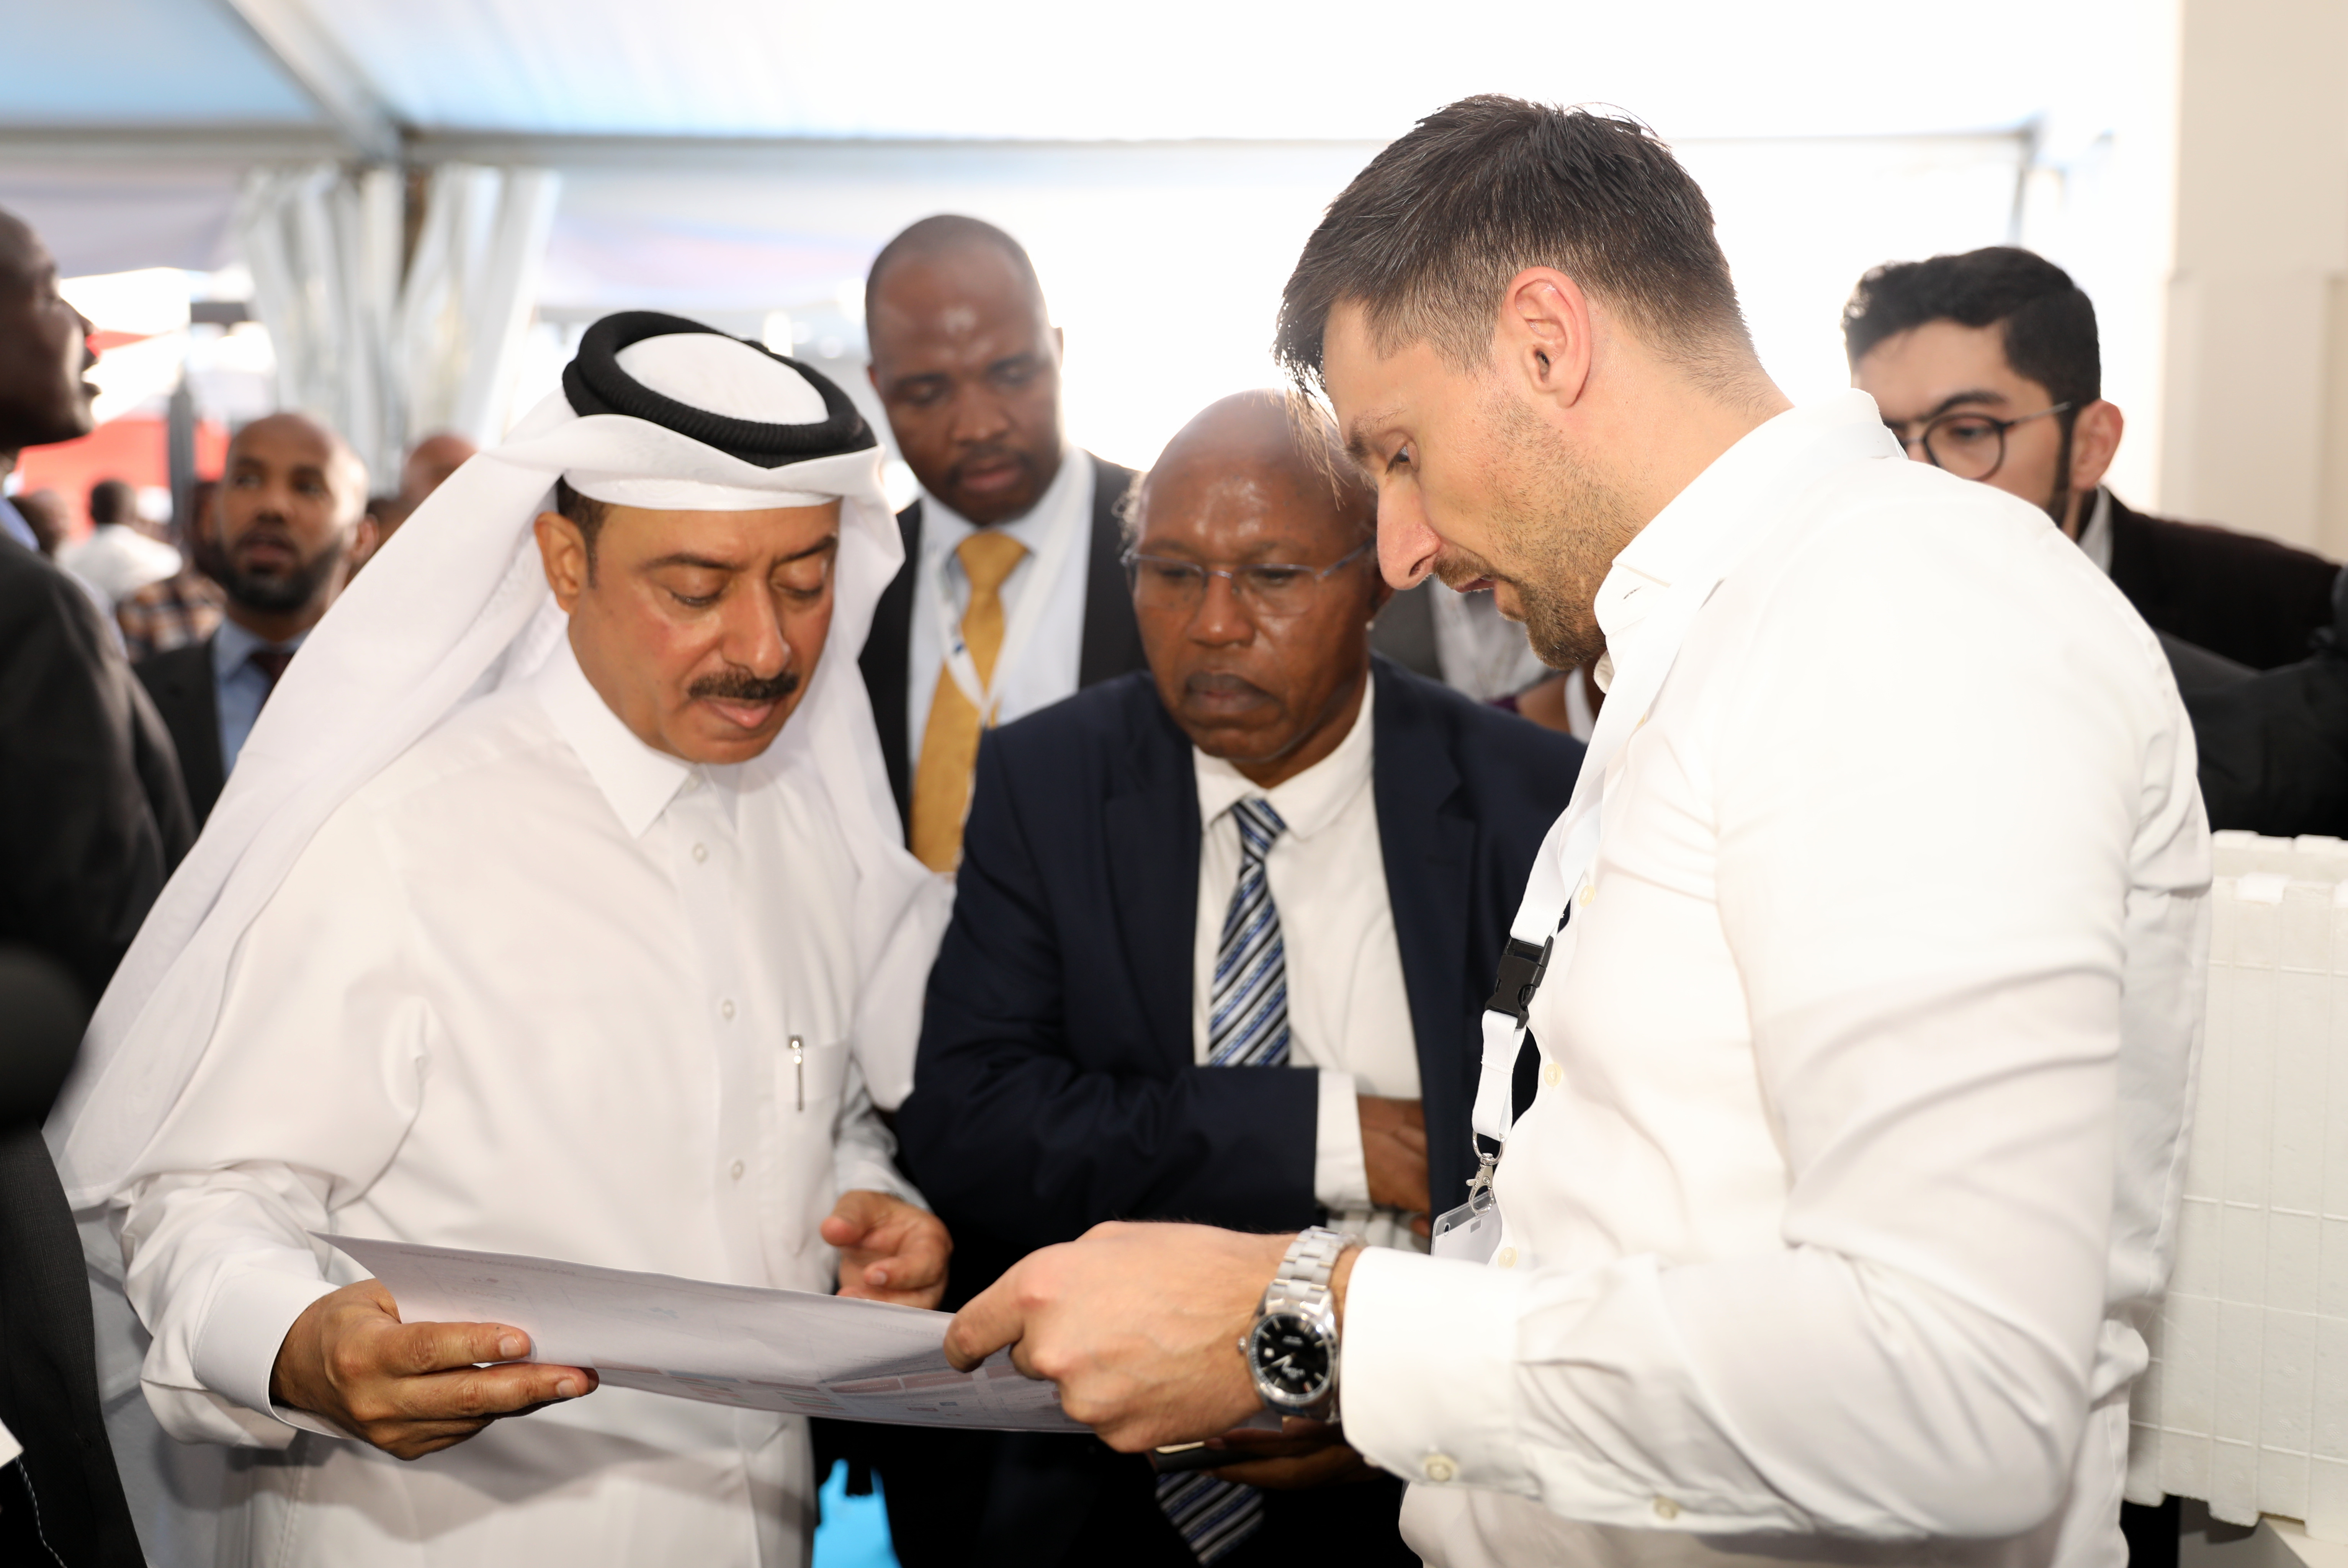 MIDDLE EAST COUNTRIES EYE KENYA AS AFRICA’S TRADING HOTSPOT AT THE BIG 5 CONSTRUCT KENYA 2019